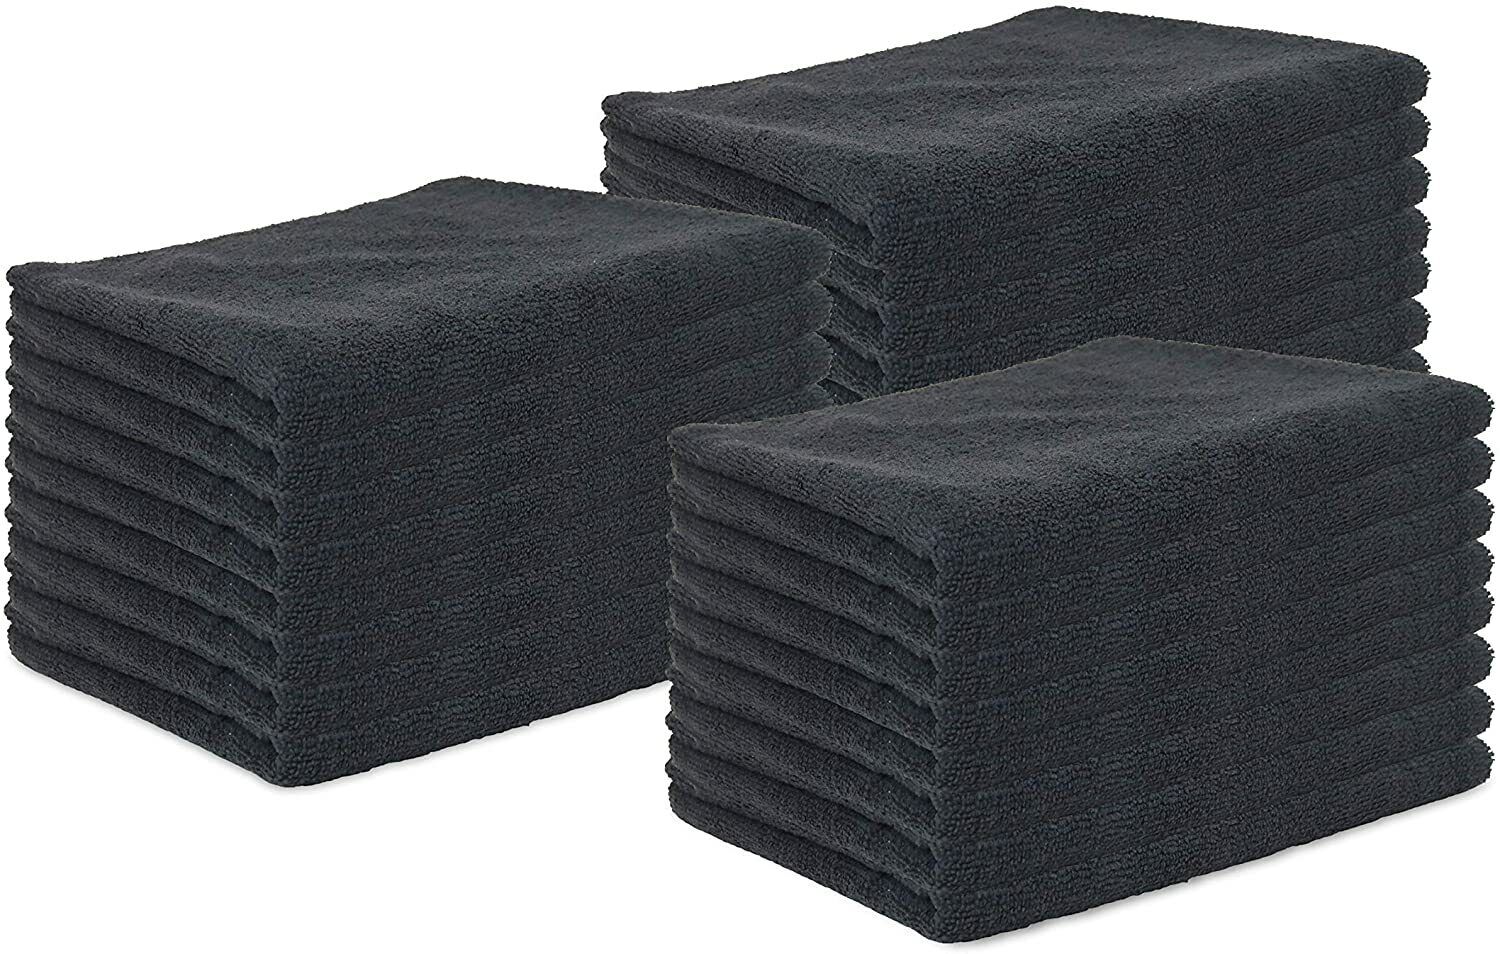 24 Pack of Microfiber Salon Towels - Bleach Safe - Black 16 x 27 - Stylist Towel Arkwright Does Not Apply